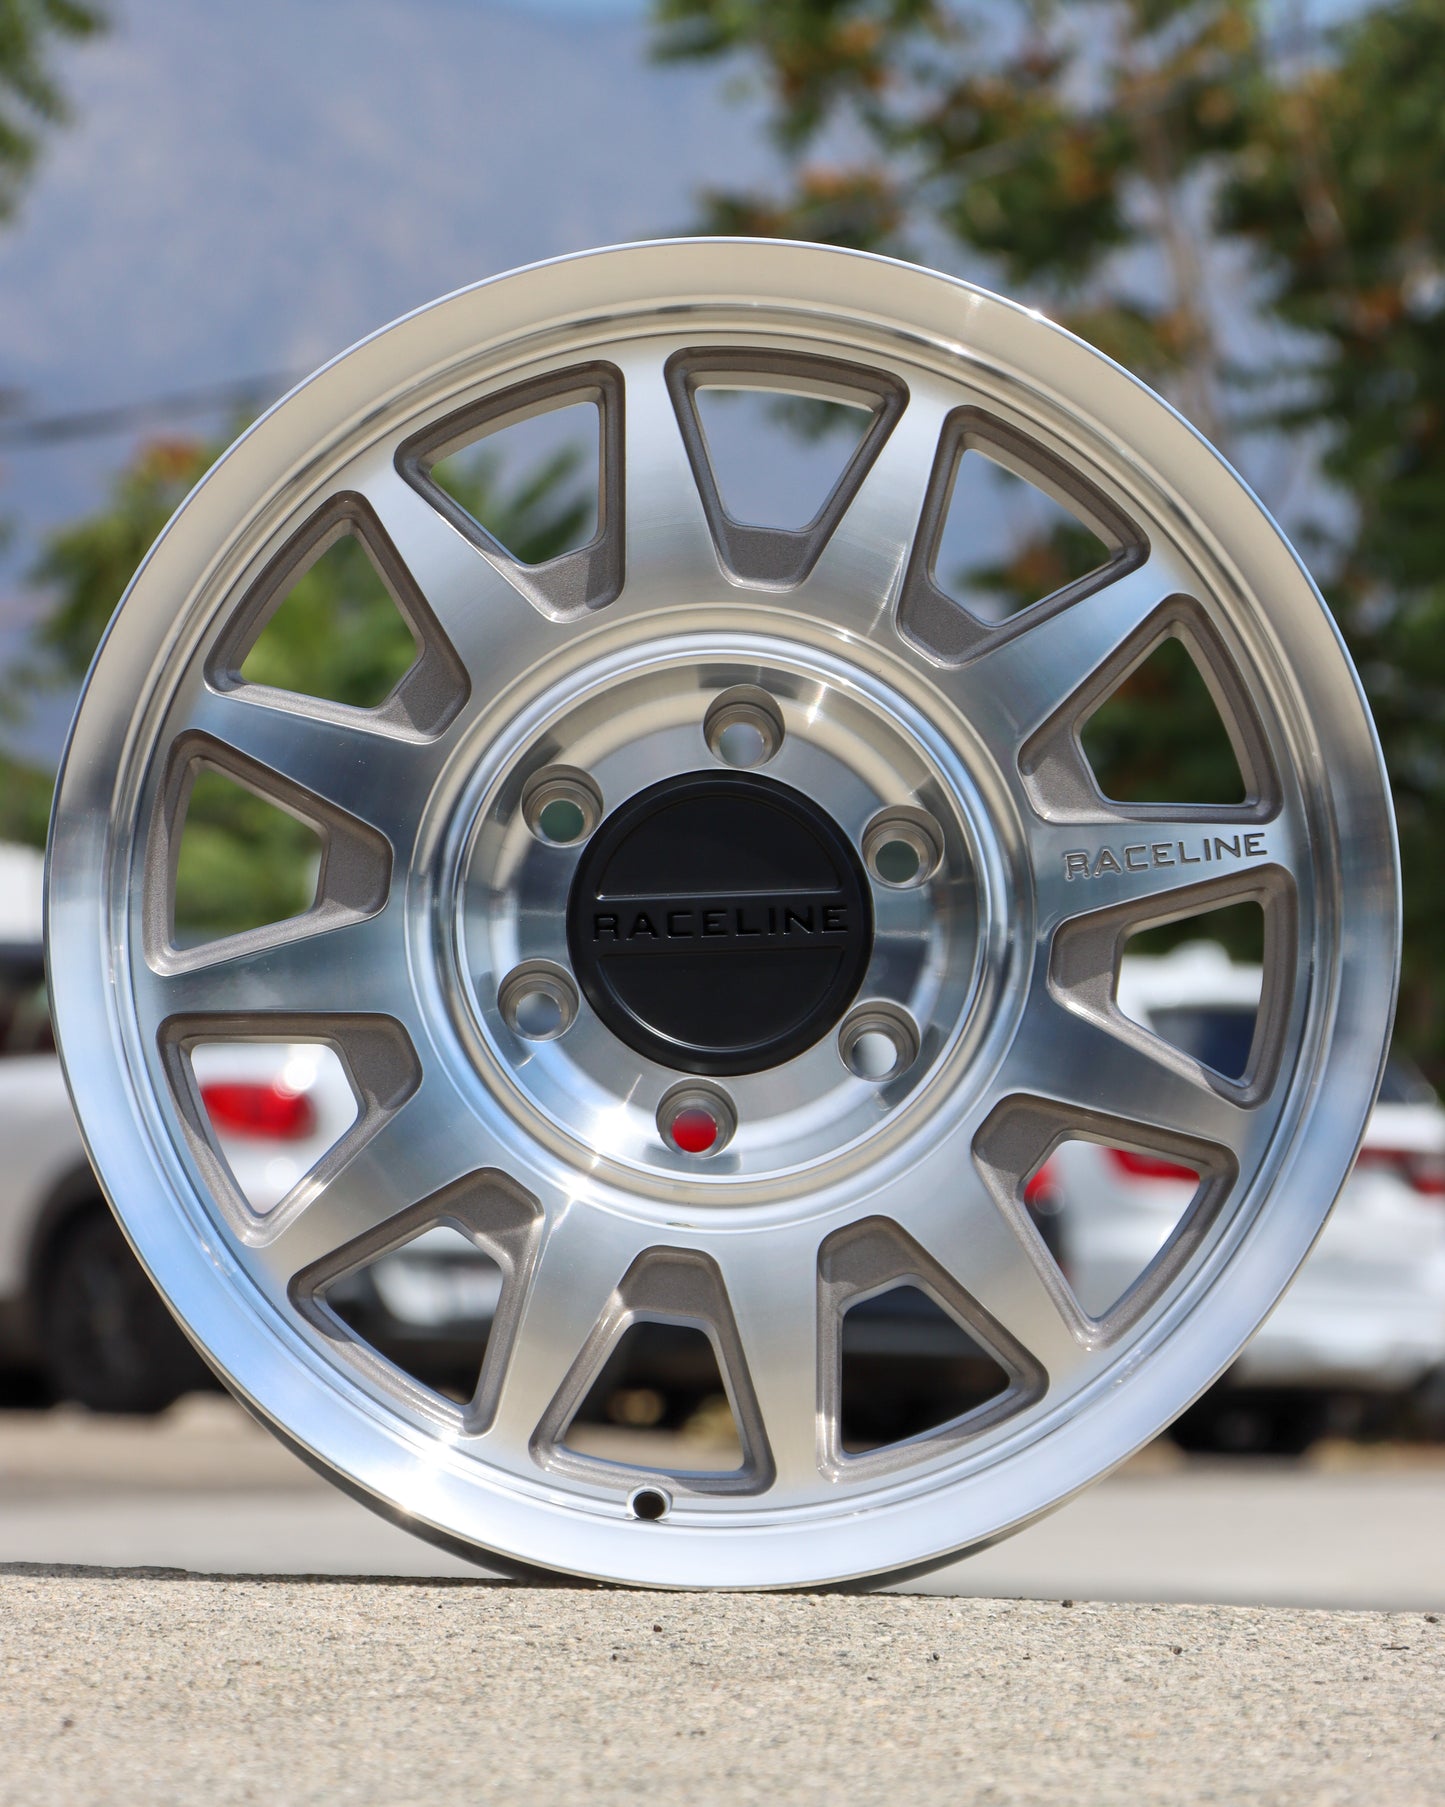 Raceline Areo wheel in a machined finish sitting on the ground with cars and trees in the background.